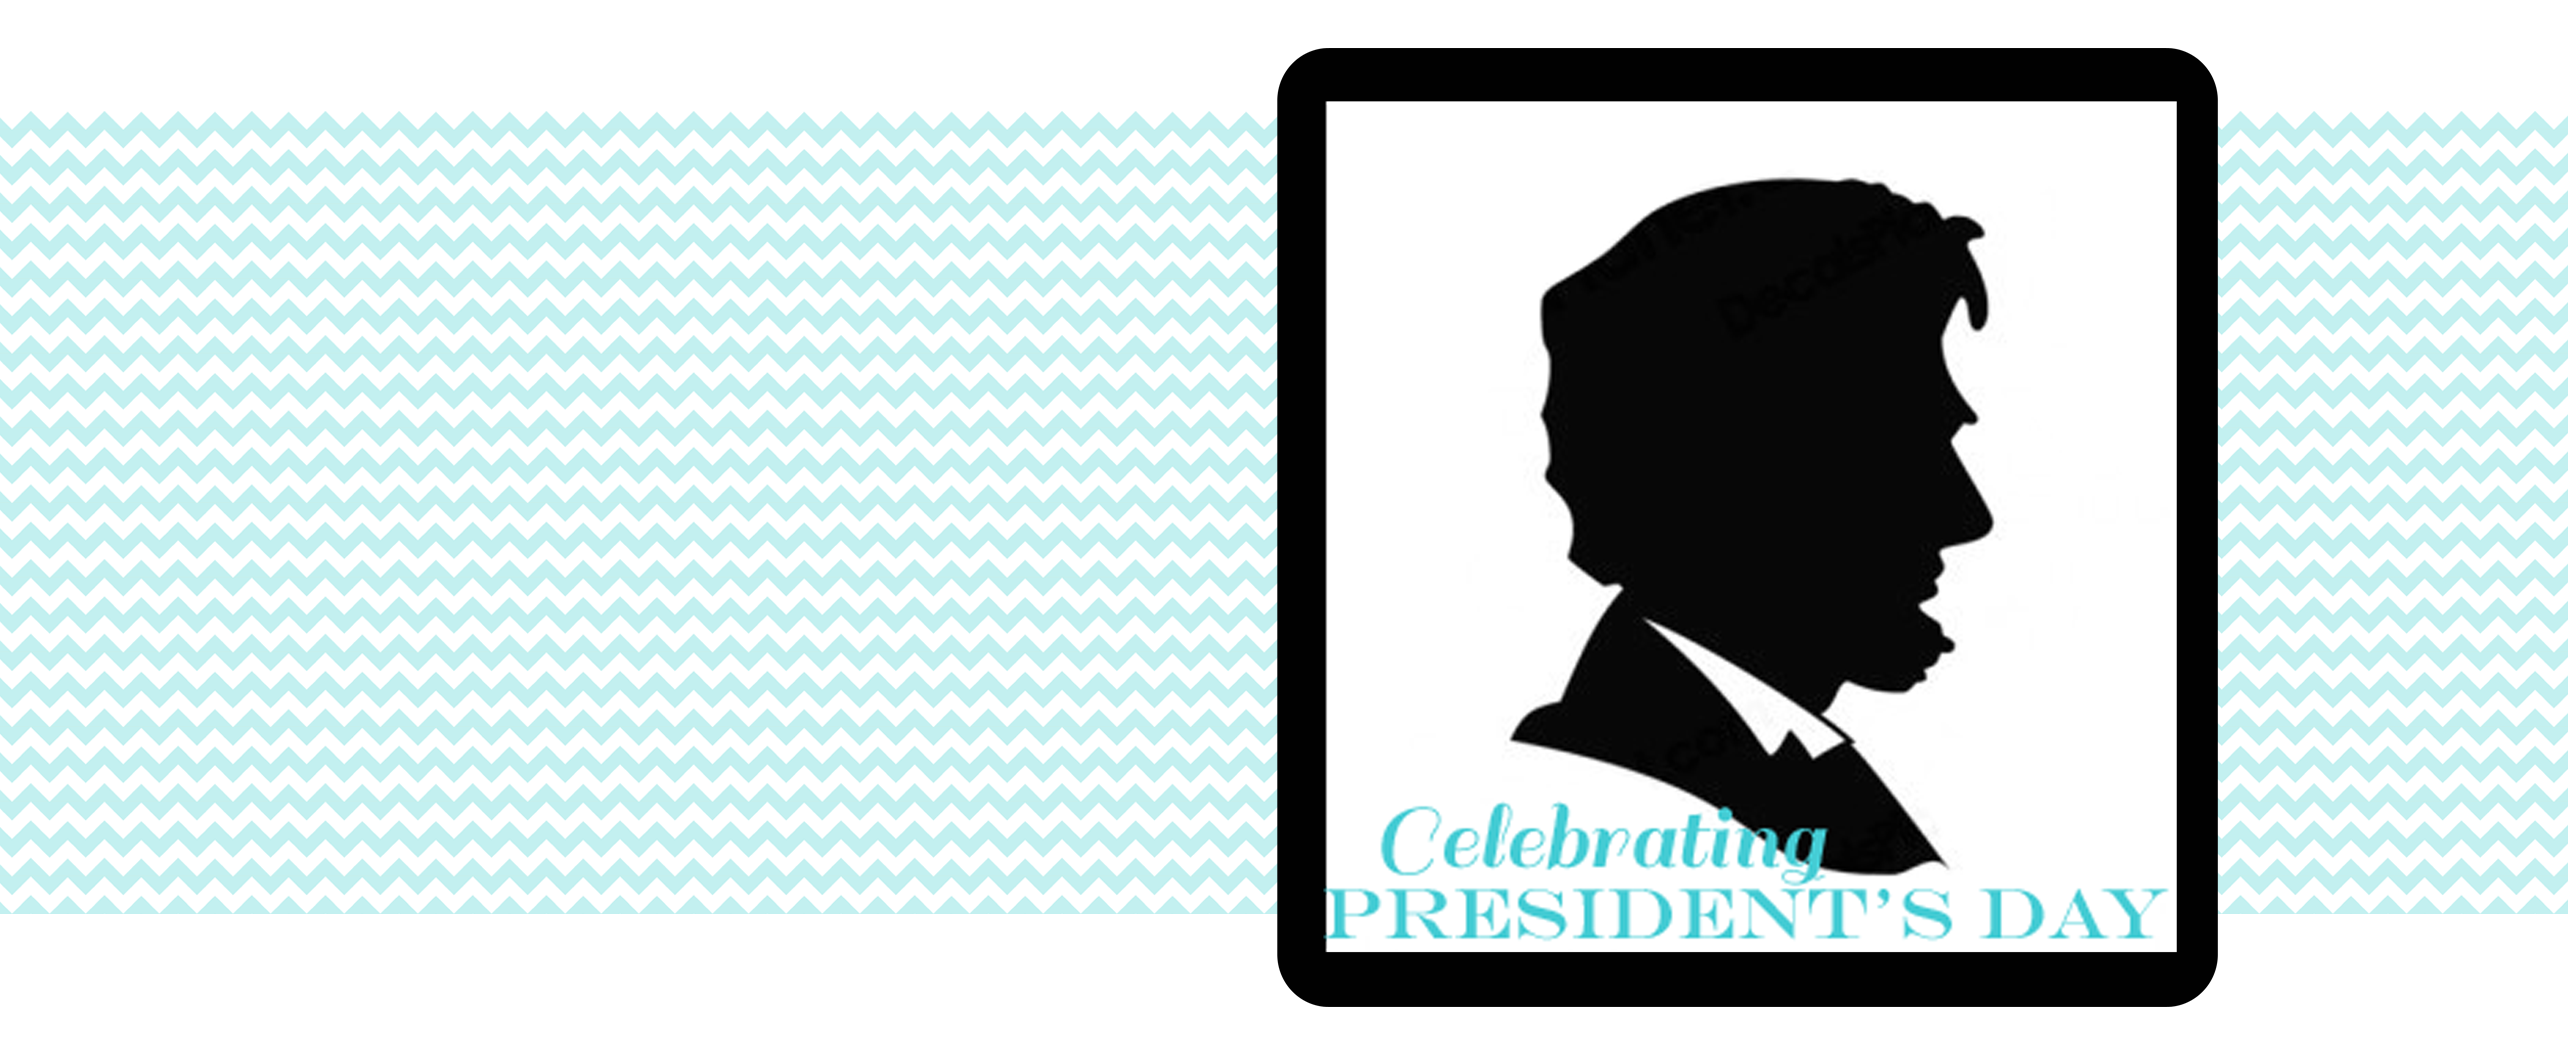 What United Day: Presidents' Of Is Lincoln Clipart